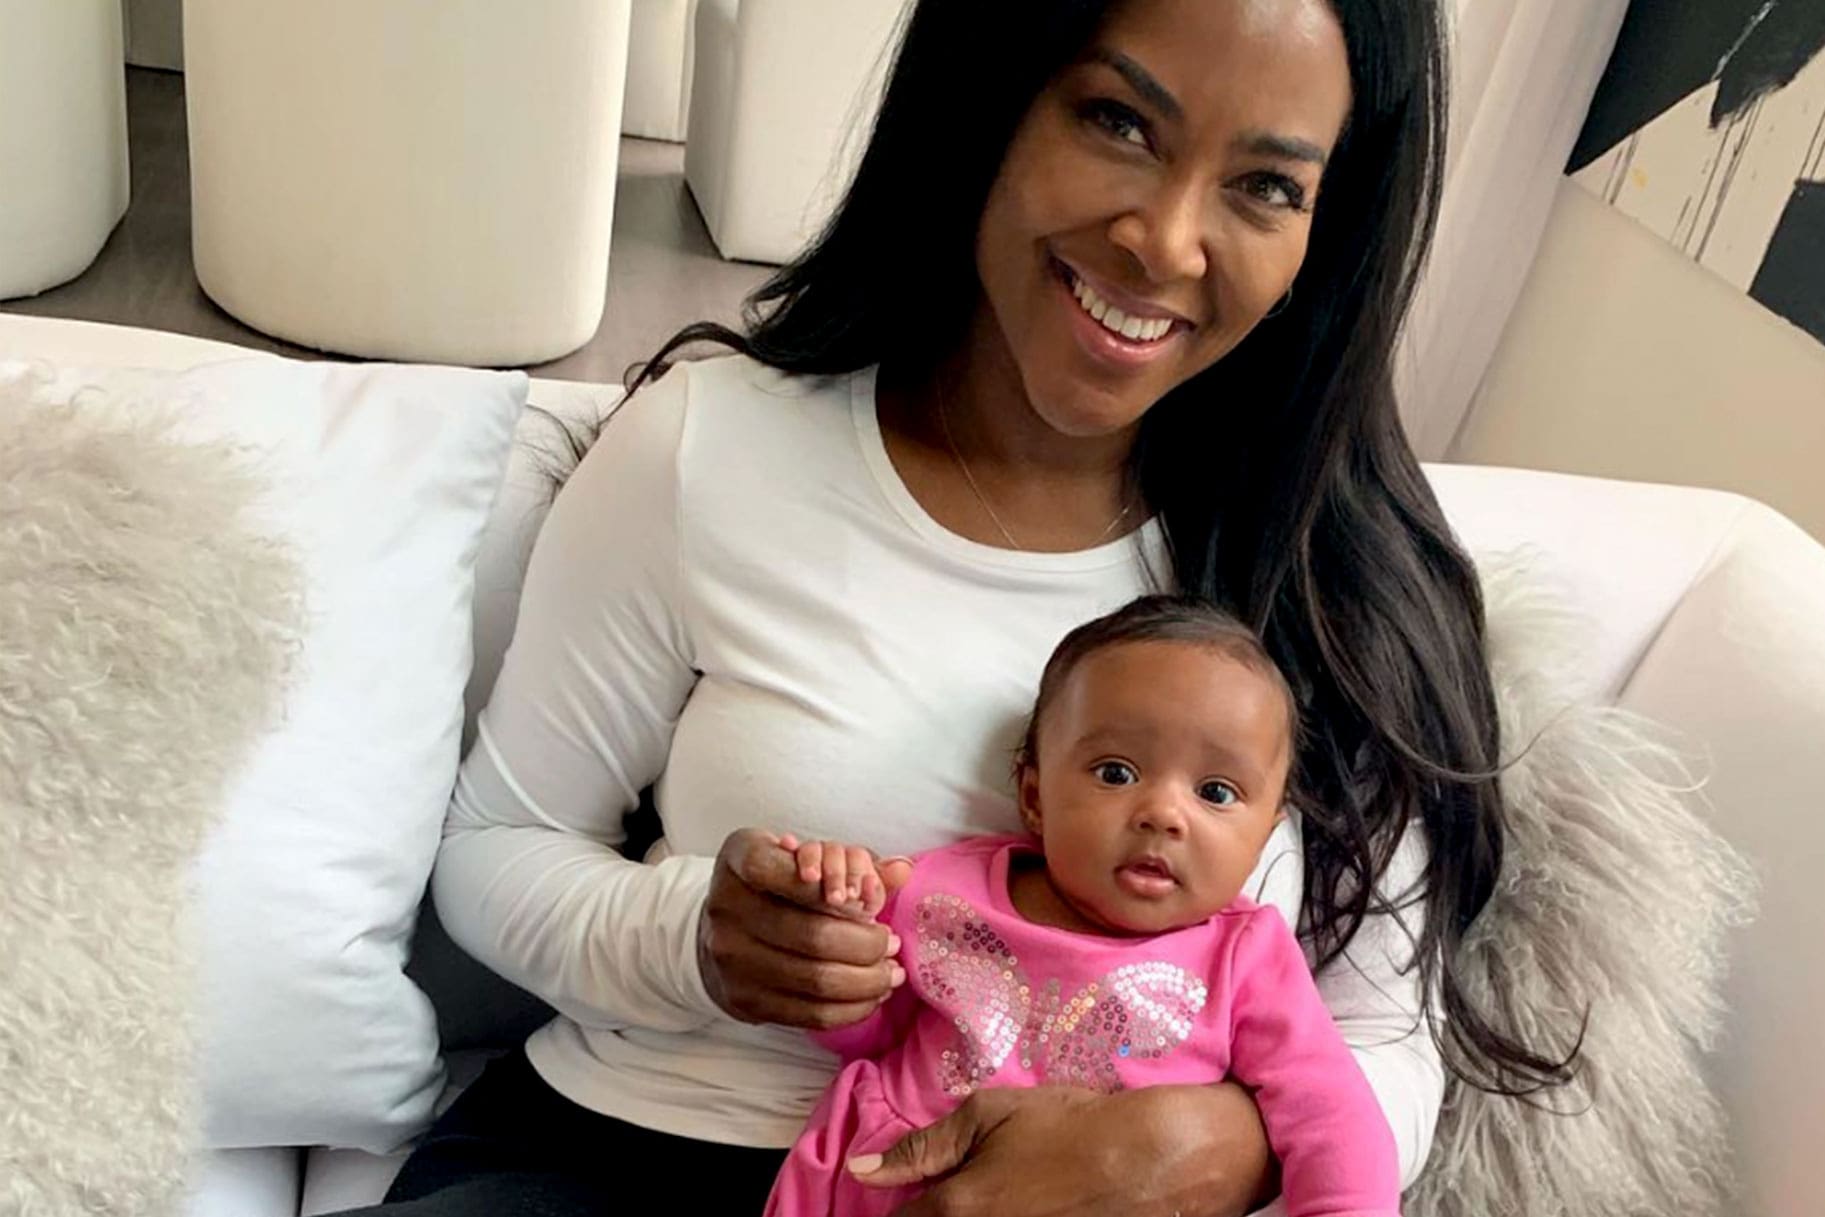 Kenya Moore Is Drop Dead Gorgeous With Baby Brooklyn In Her Arms - See New Pics From The Sheen Photoshoot